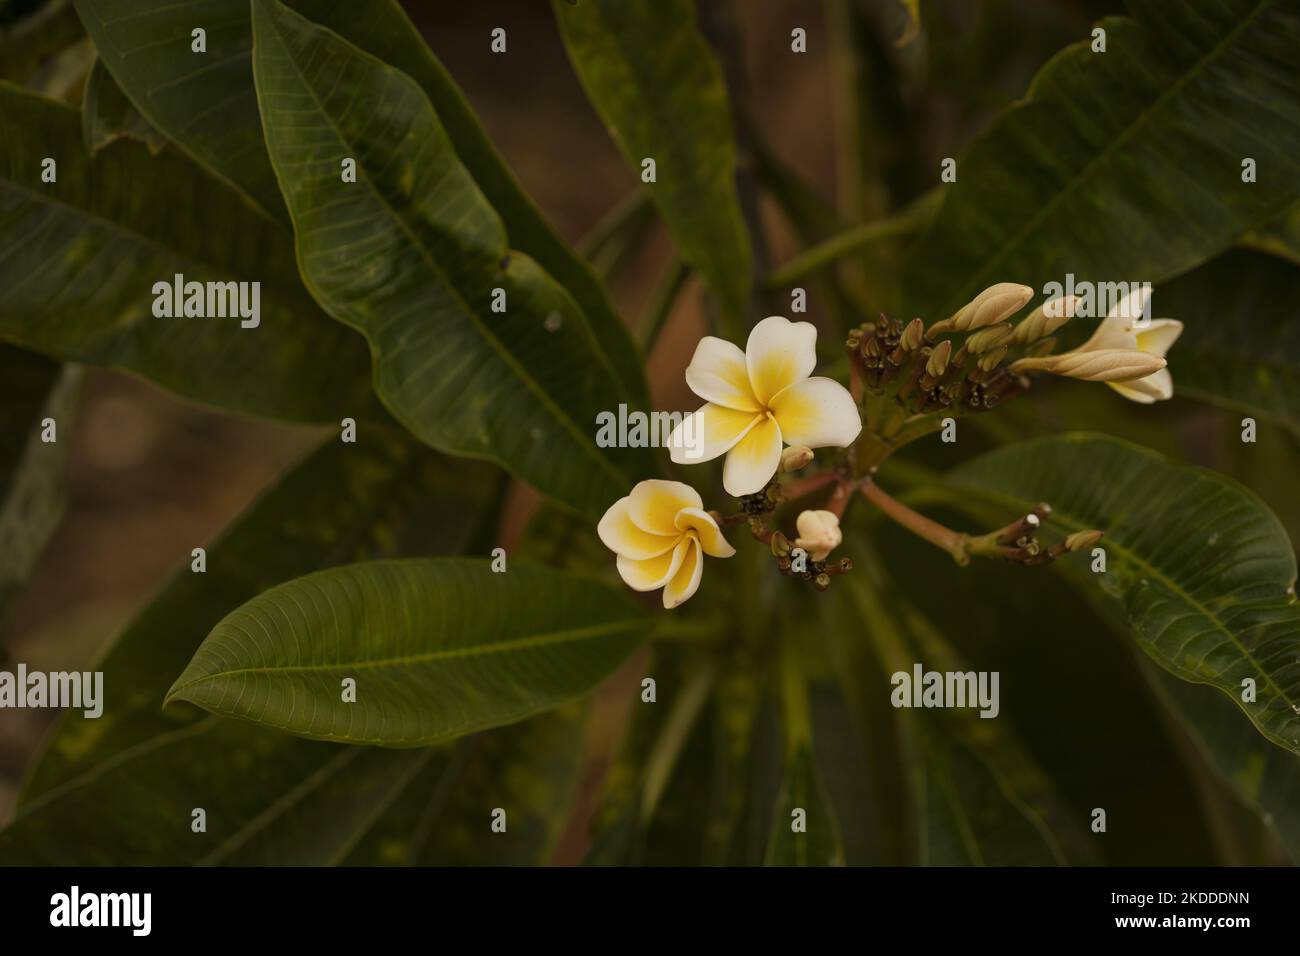 A closeup of beautiful white plumeria flowers bloom in the tropical garden among the green leaves Stock Photo